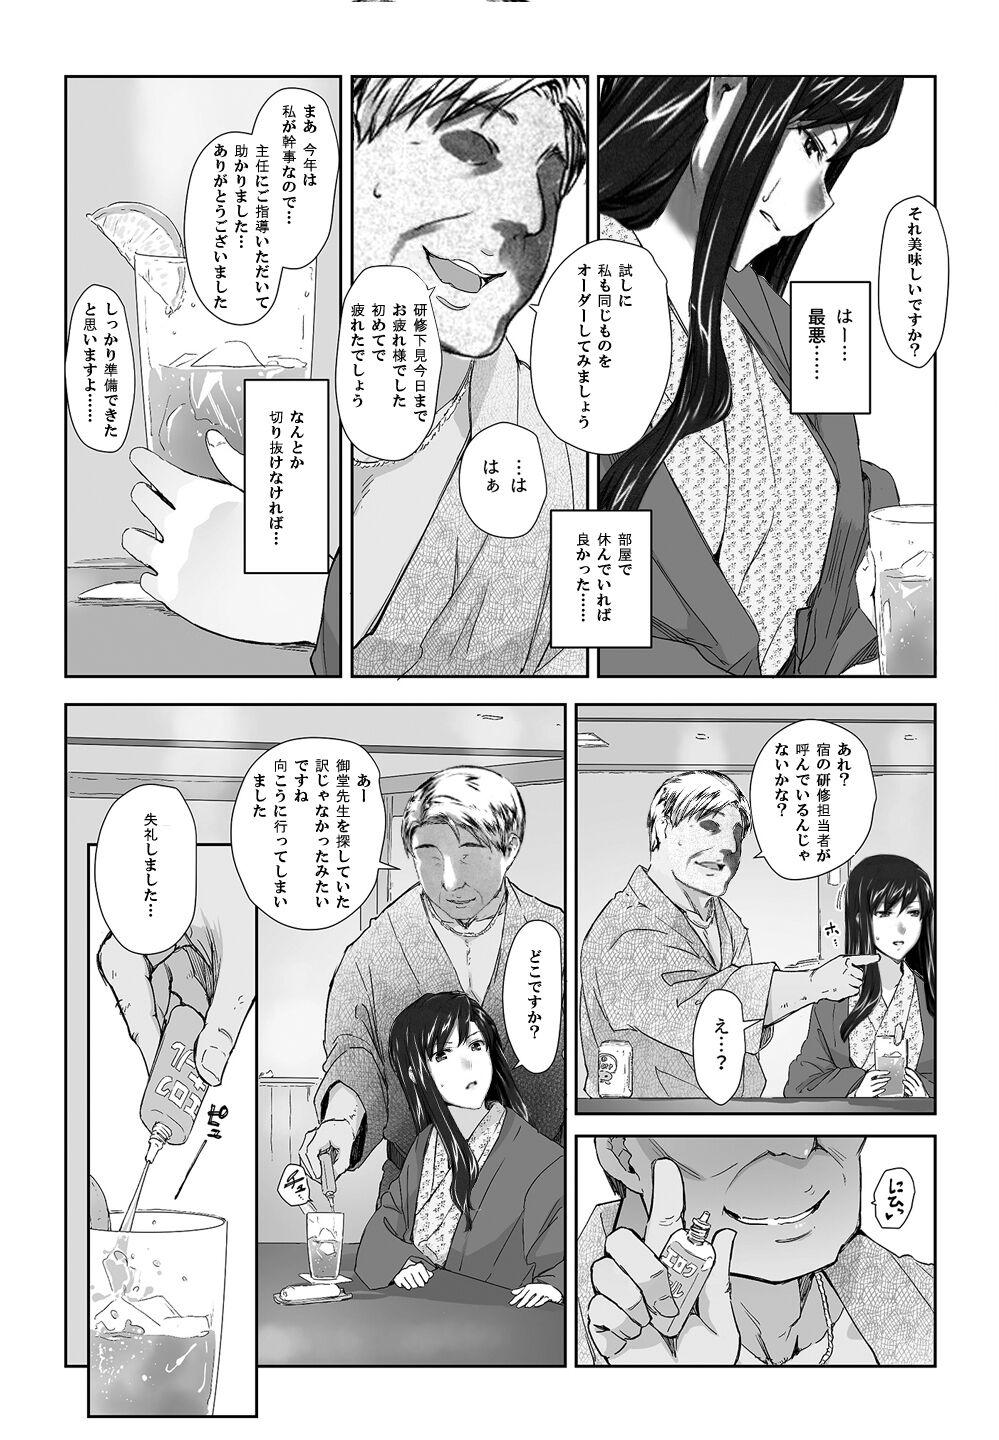 Gaygroupsex Sakiko-san in delusion Vol.8 revised ~Sakiko-san's circumstance at an educational training Route3~ (collage) (Continue to “First day of study trip” (page 42) of Vol.1) Gay Brownhair - Page 4